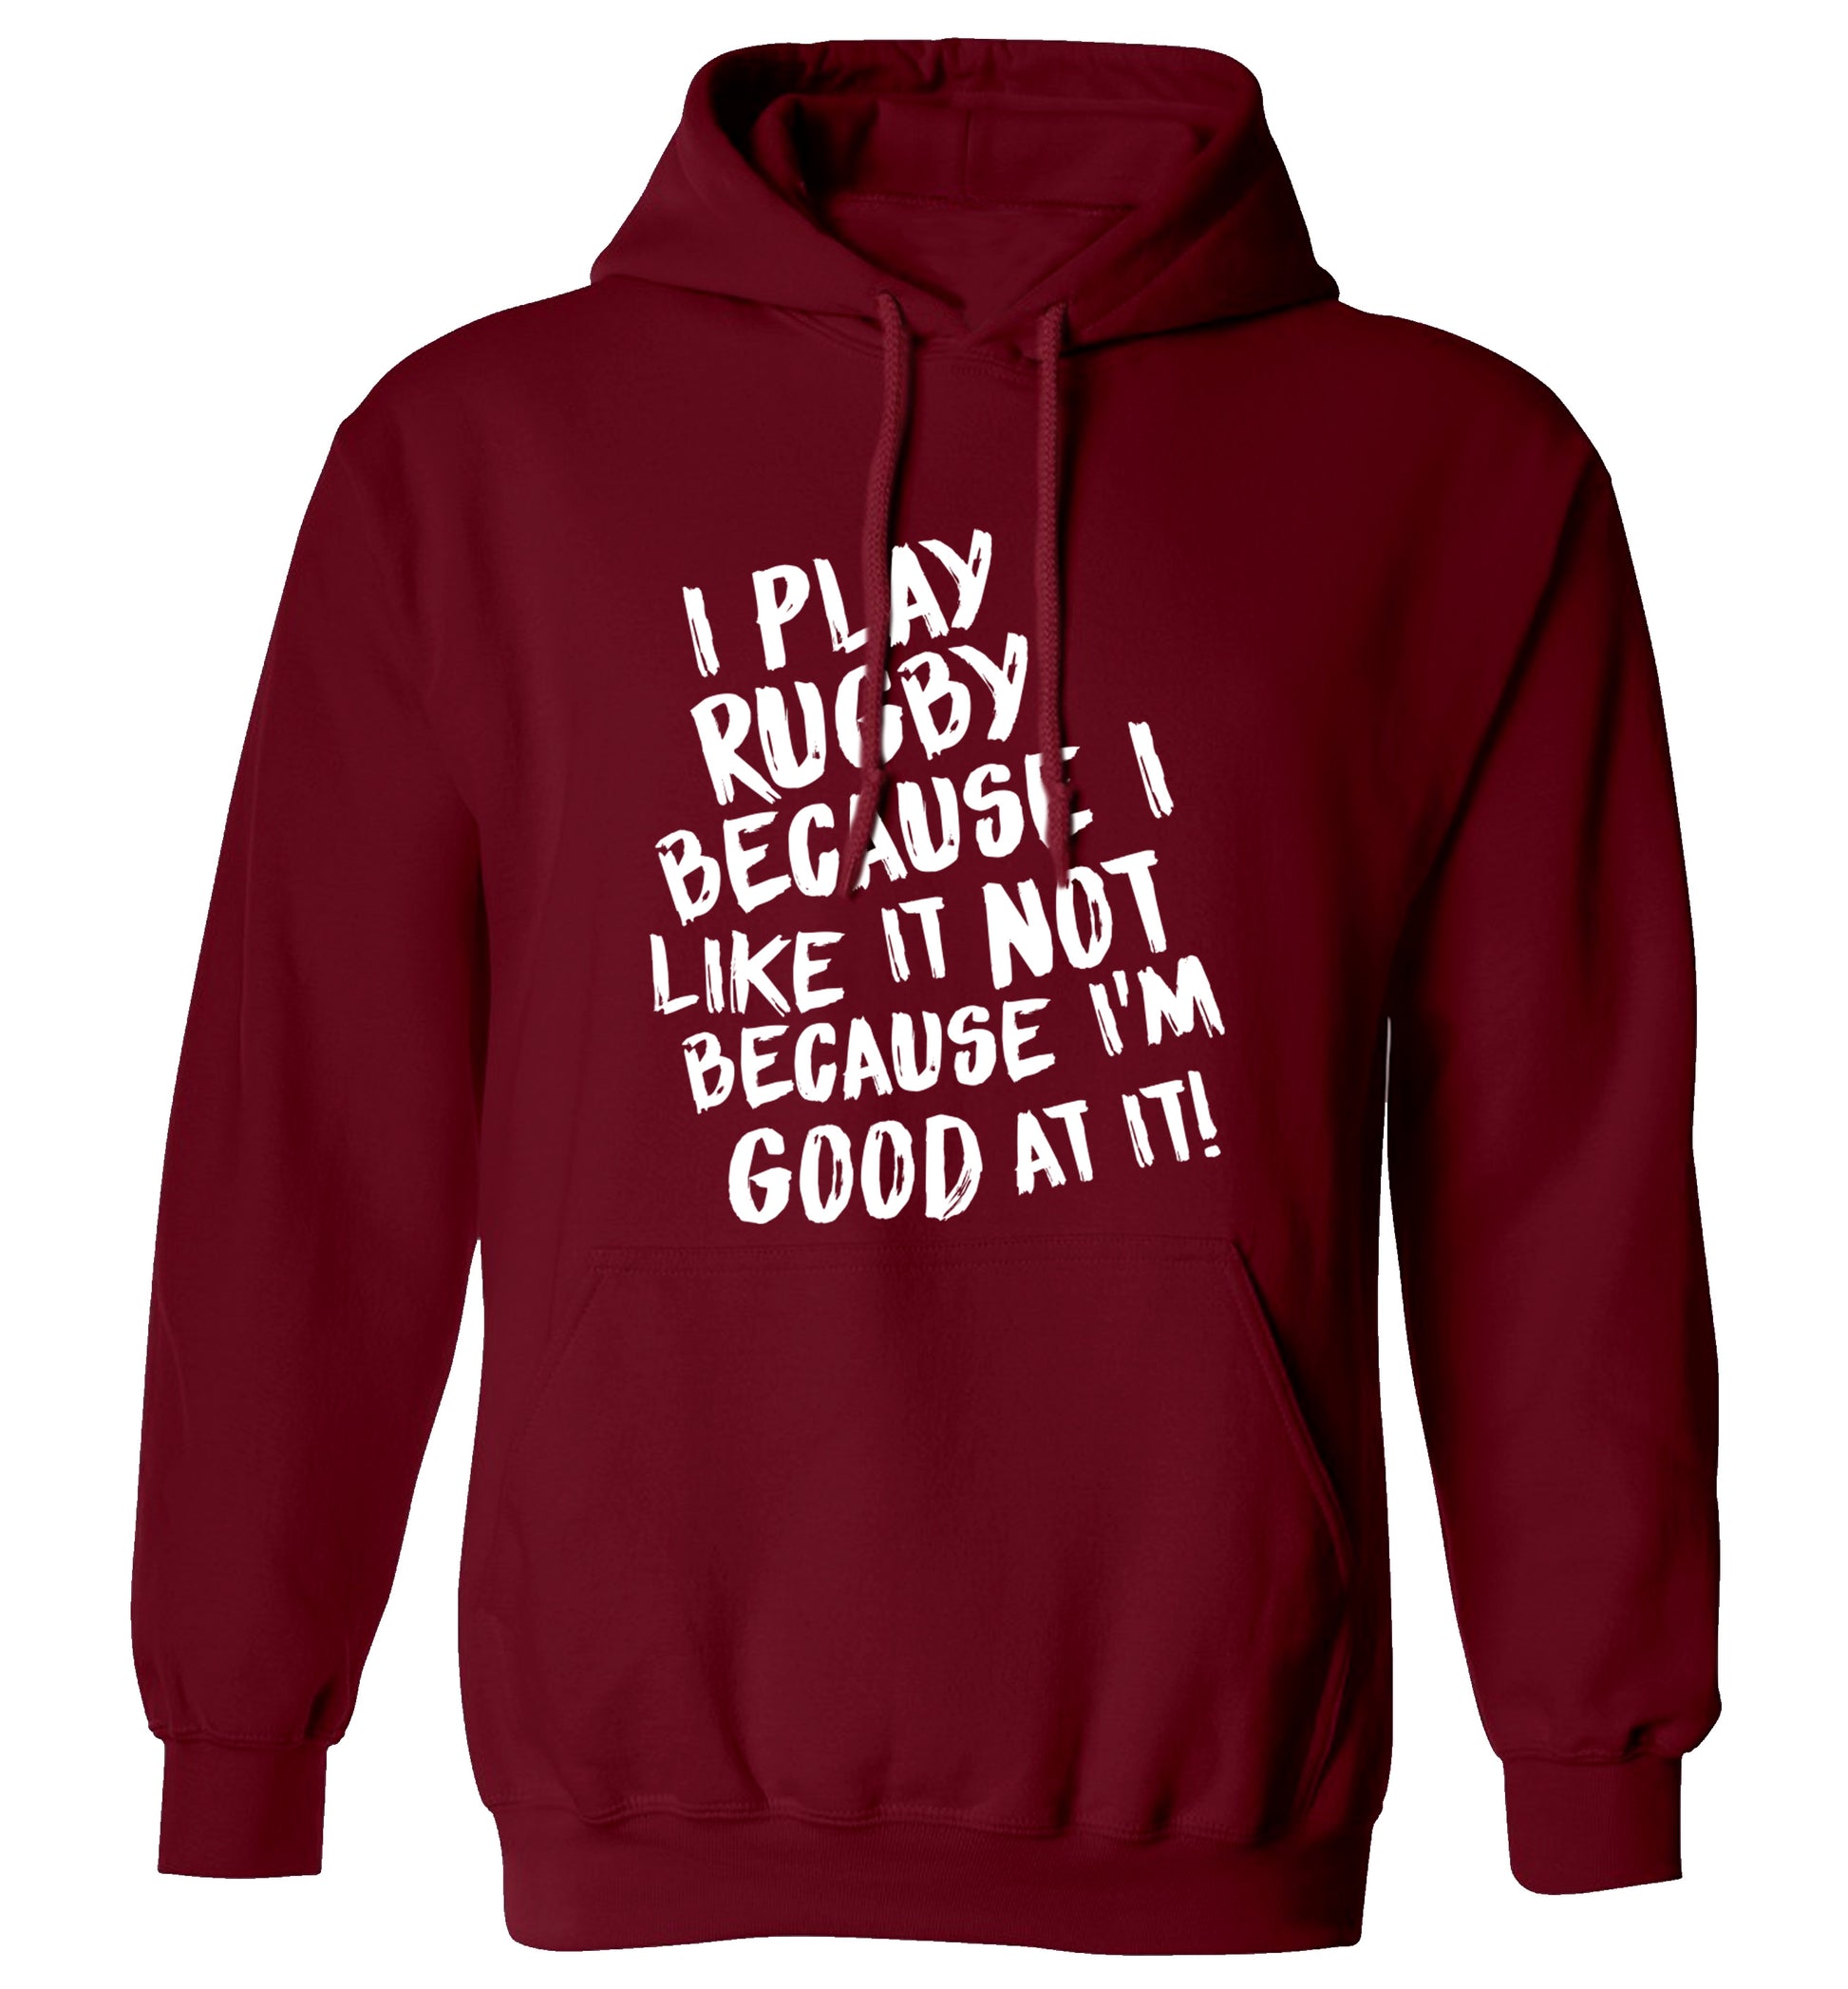 I play rugby because I like it not because I'm good at it adults unisex maroon hoodie 2XL